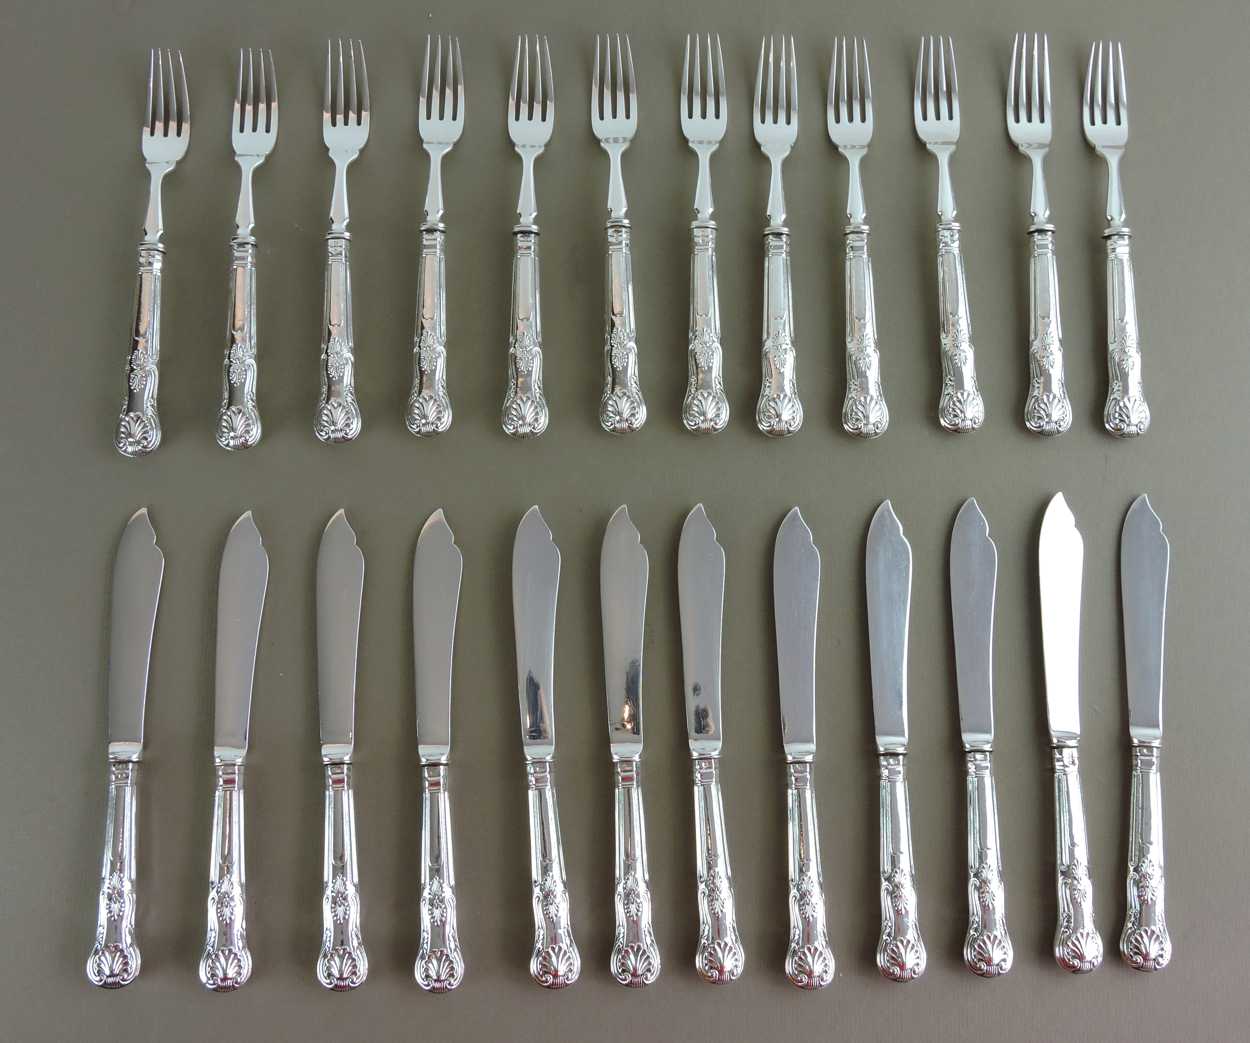 Fish Fork And Knife